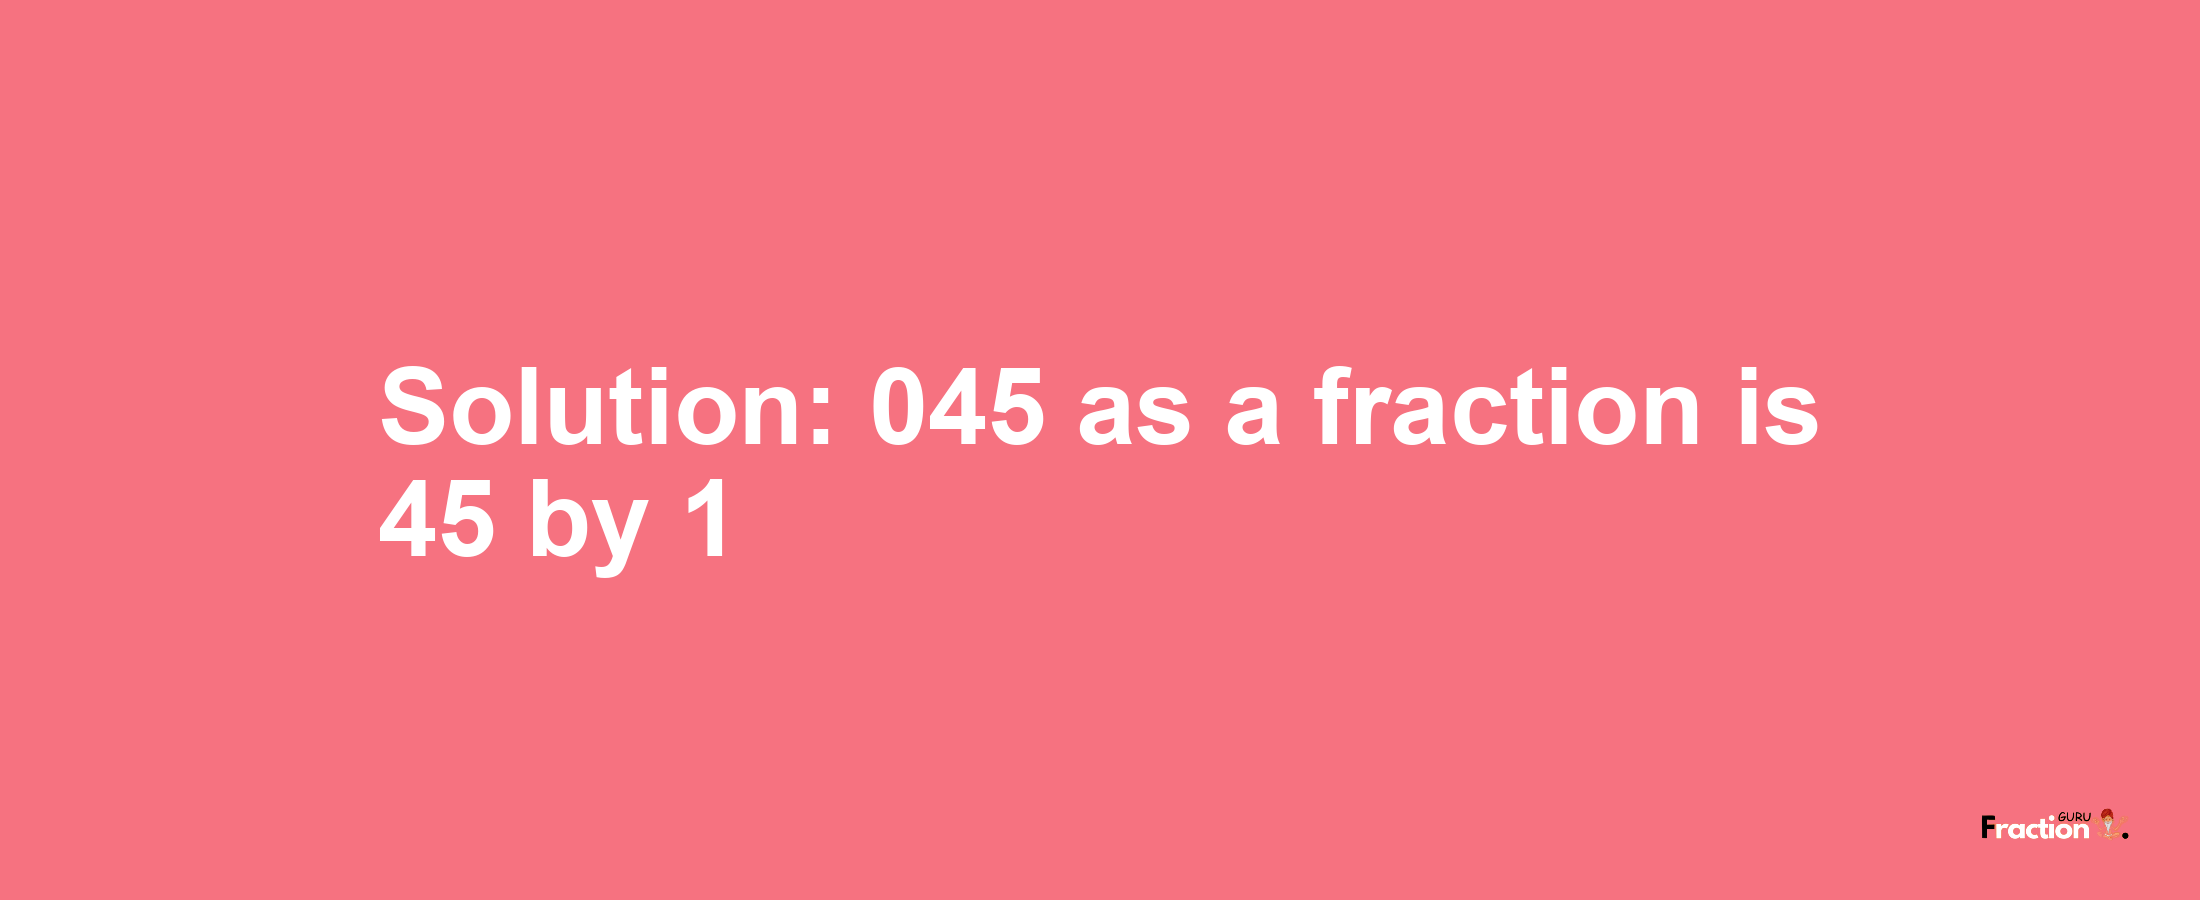 Solution:045 as a fraction is 45/1